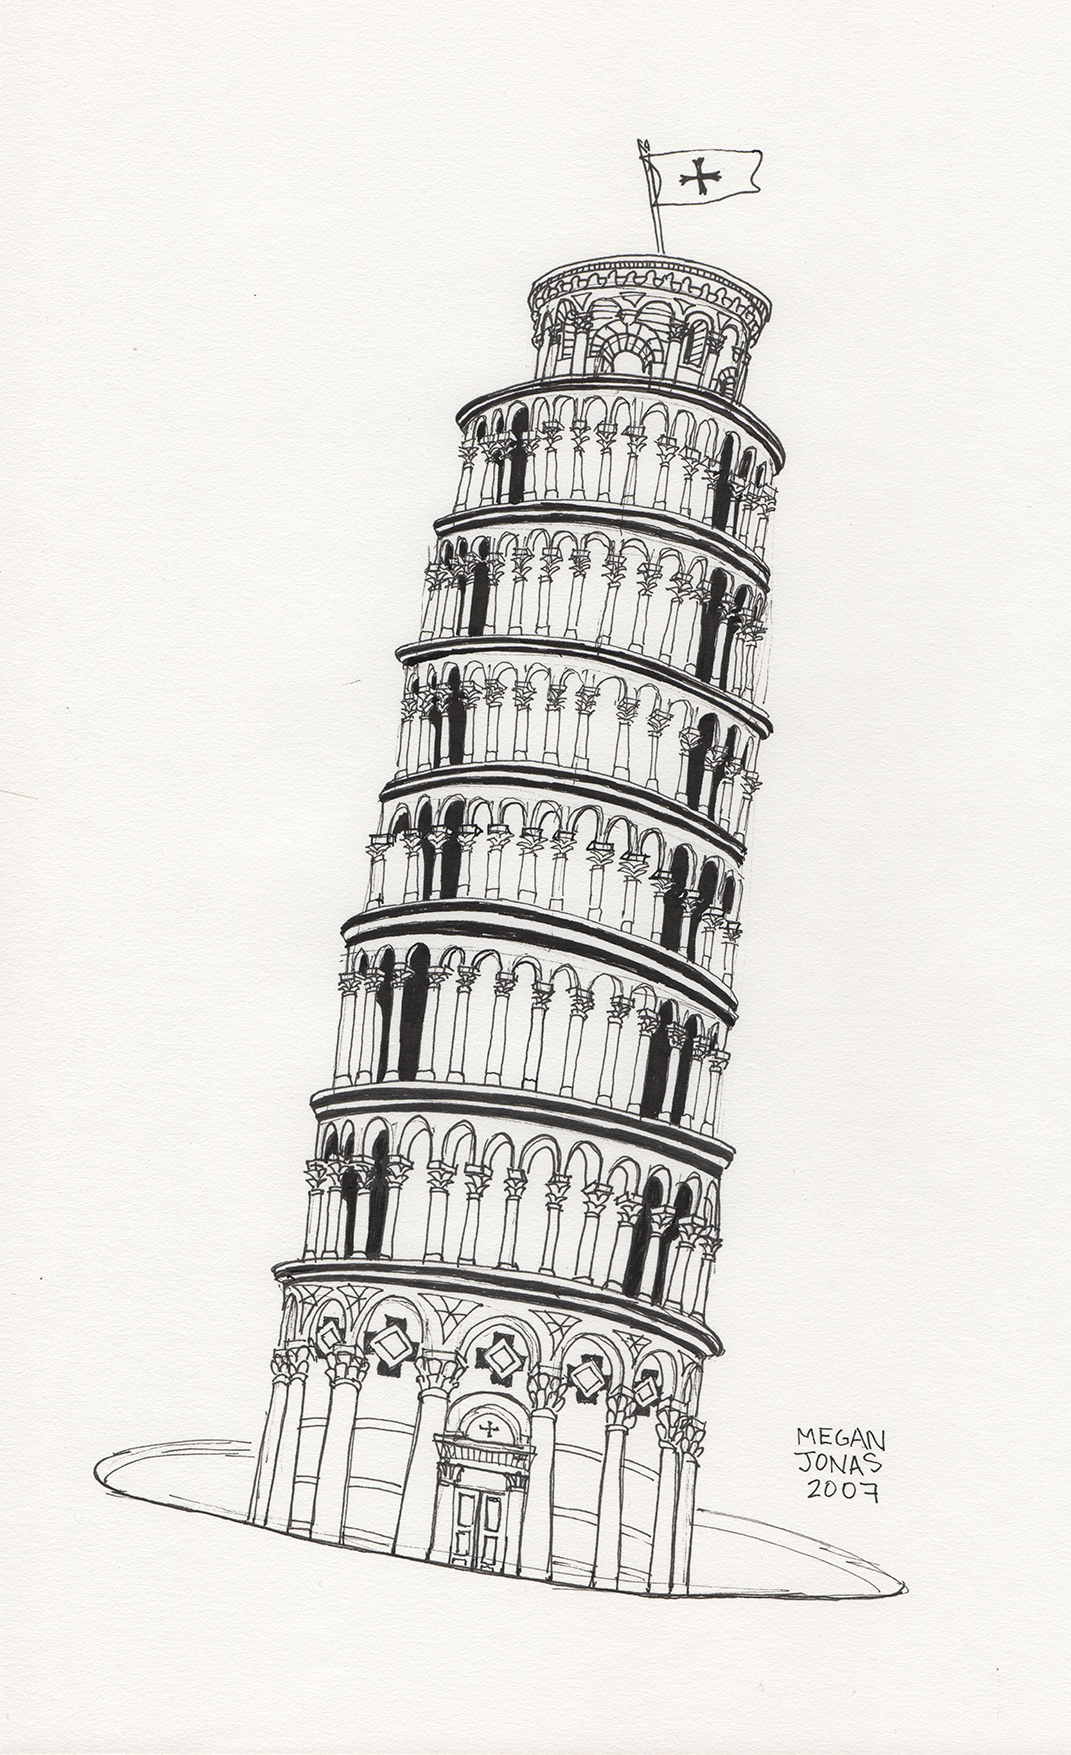 Leaning Tower Of Pisa Drawing - ClipArt Best